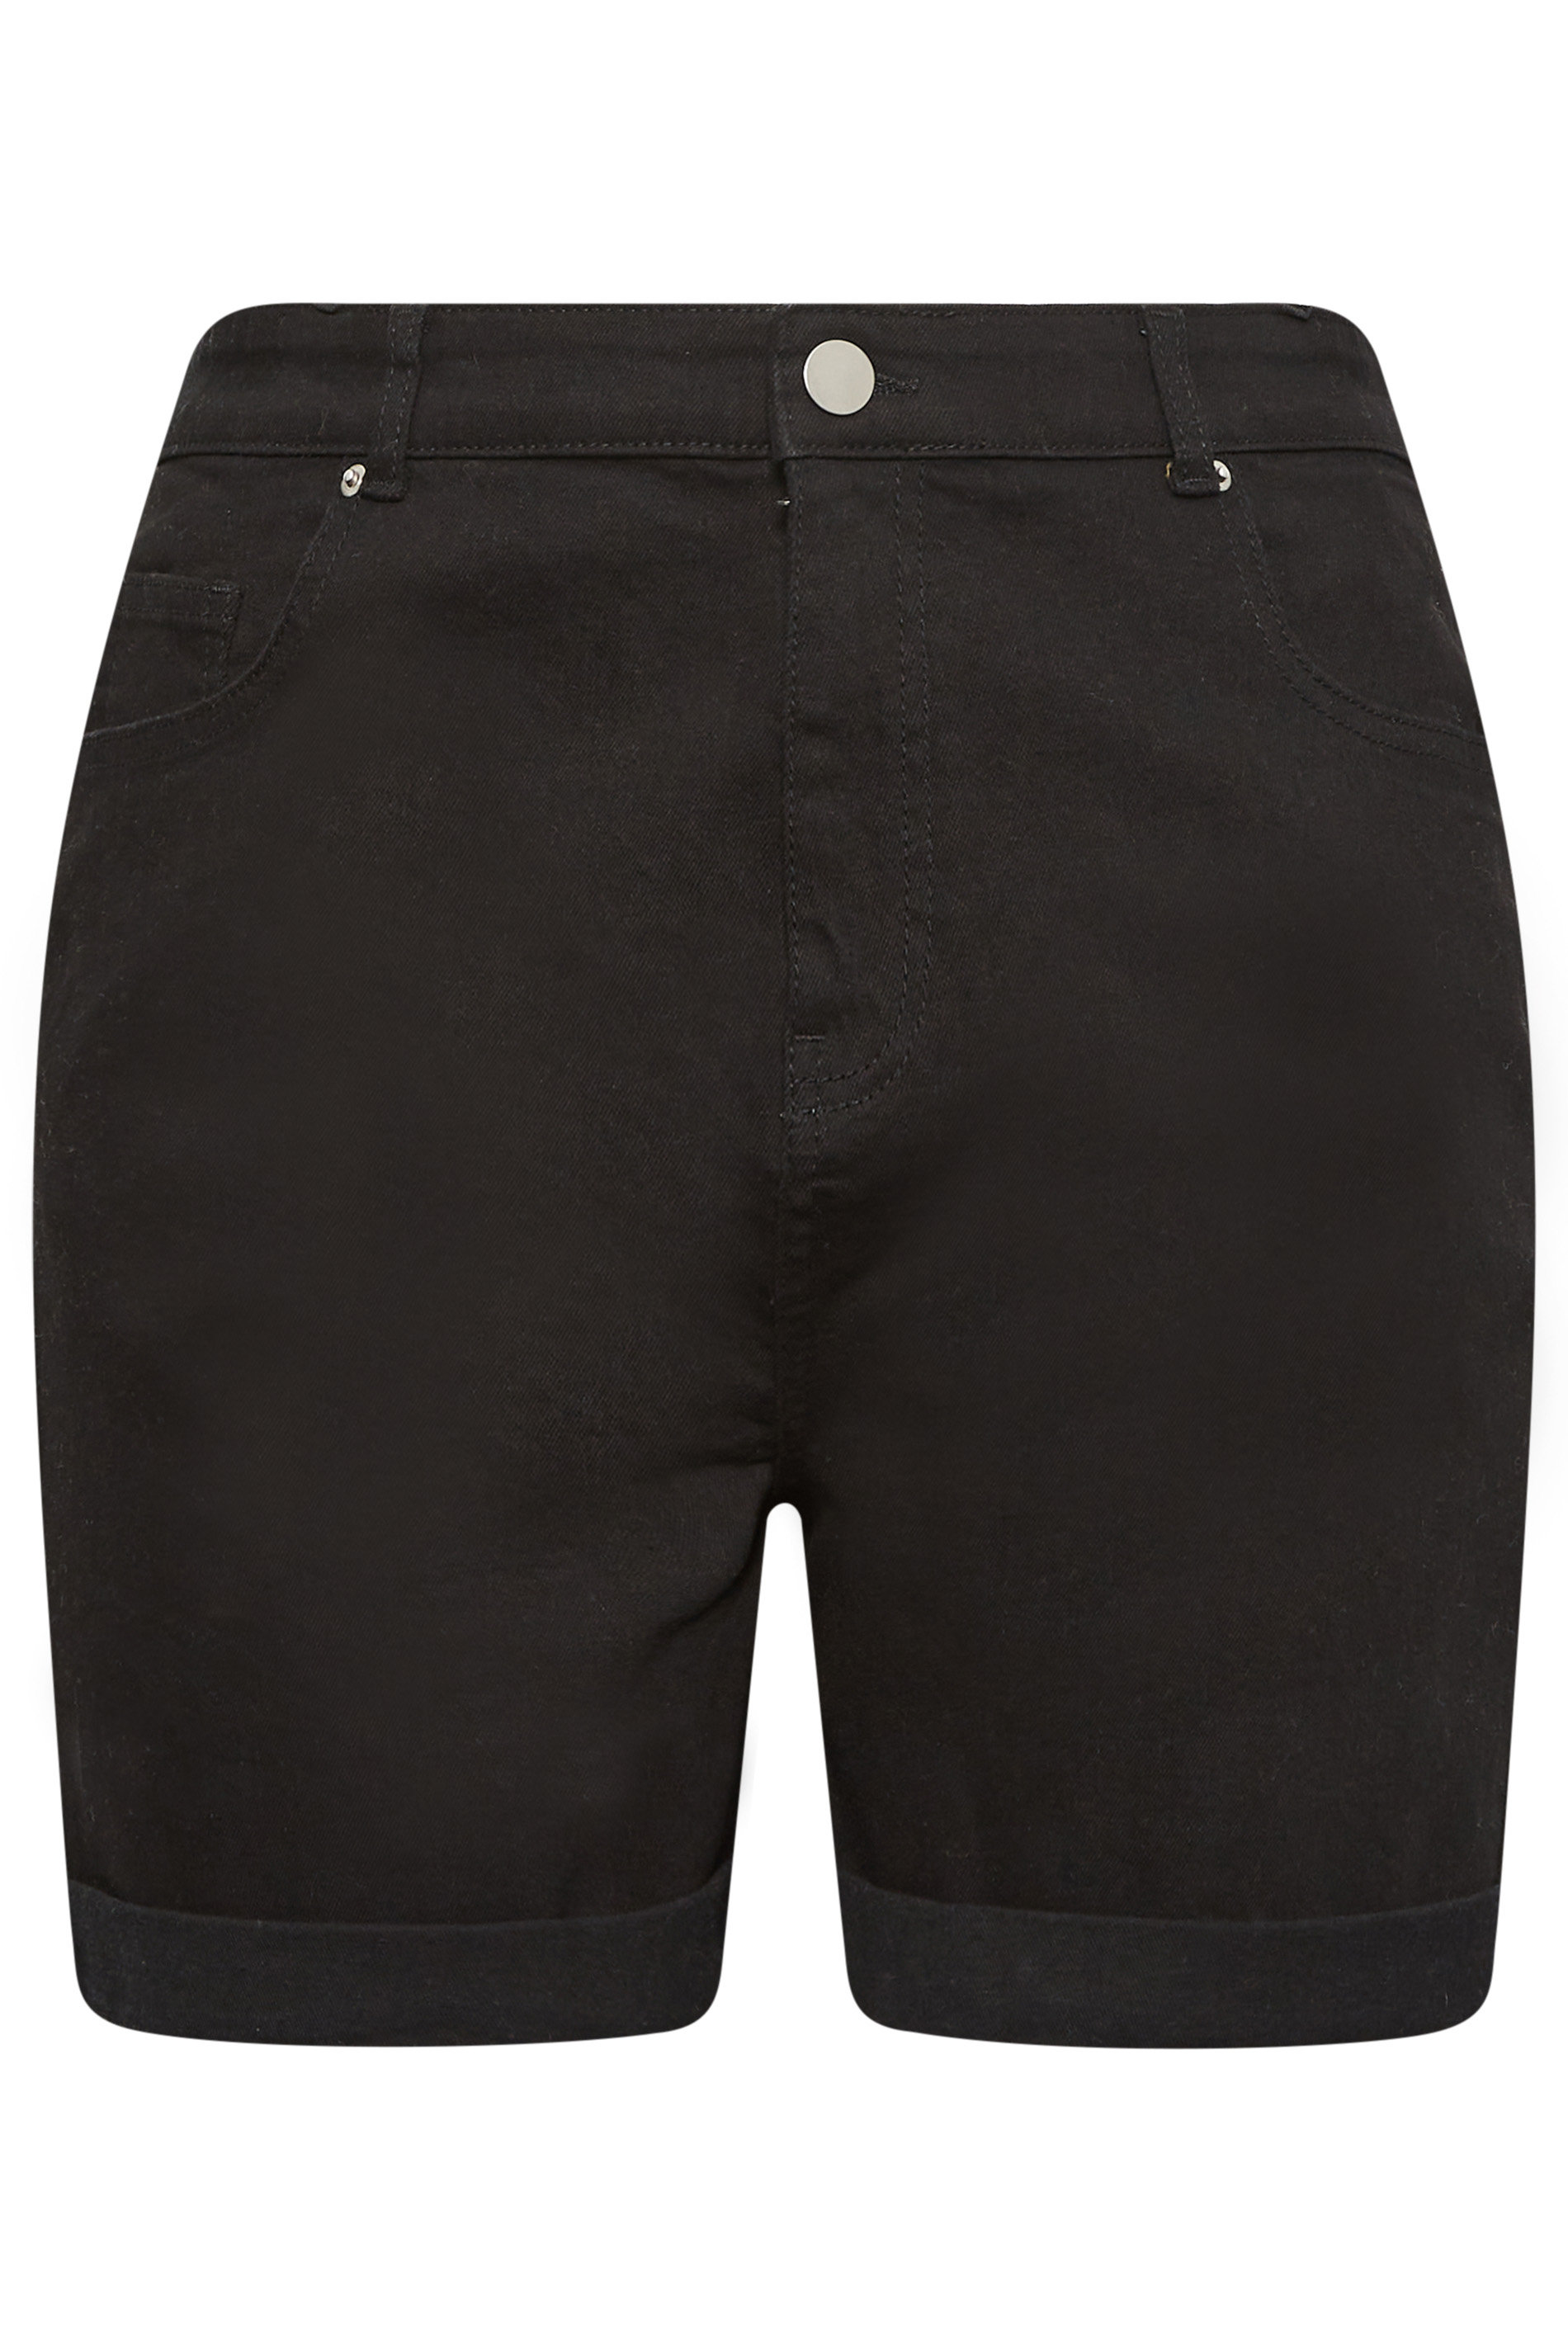 YOURS Curve Plus Size Black Mom Shorts | Yours Clothing